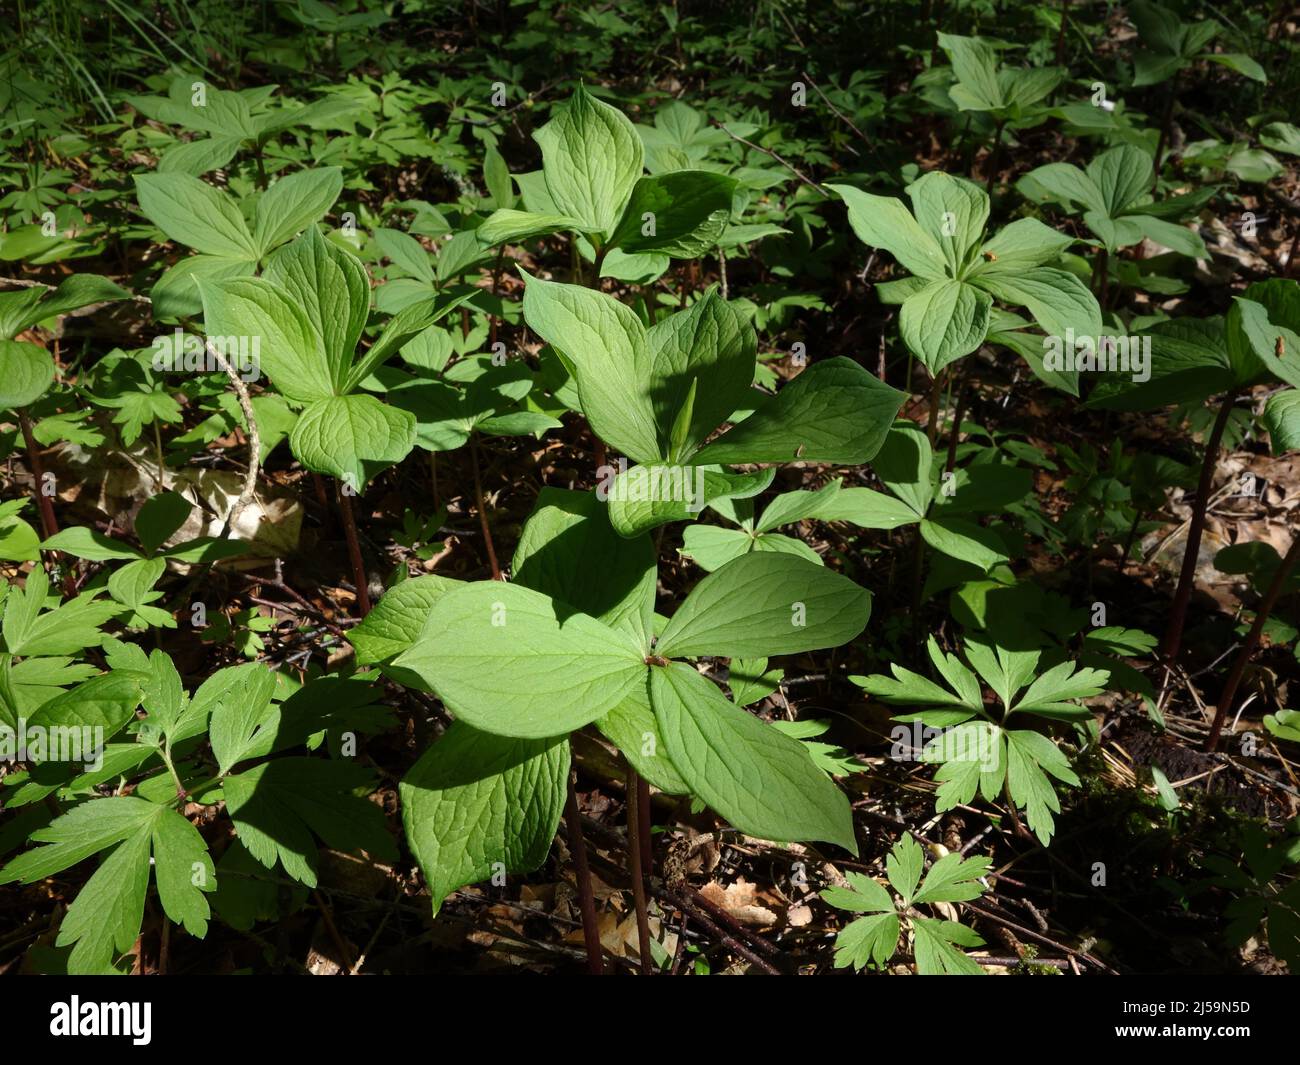 Paris quadrifolia covering a large area of the forest floor, on tall stalks and with its large typical four-leaf formation. It is a poisonous plant. Stock Photo